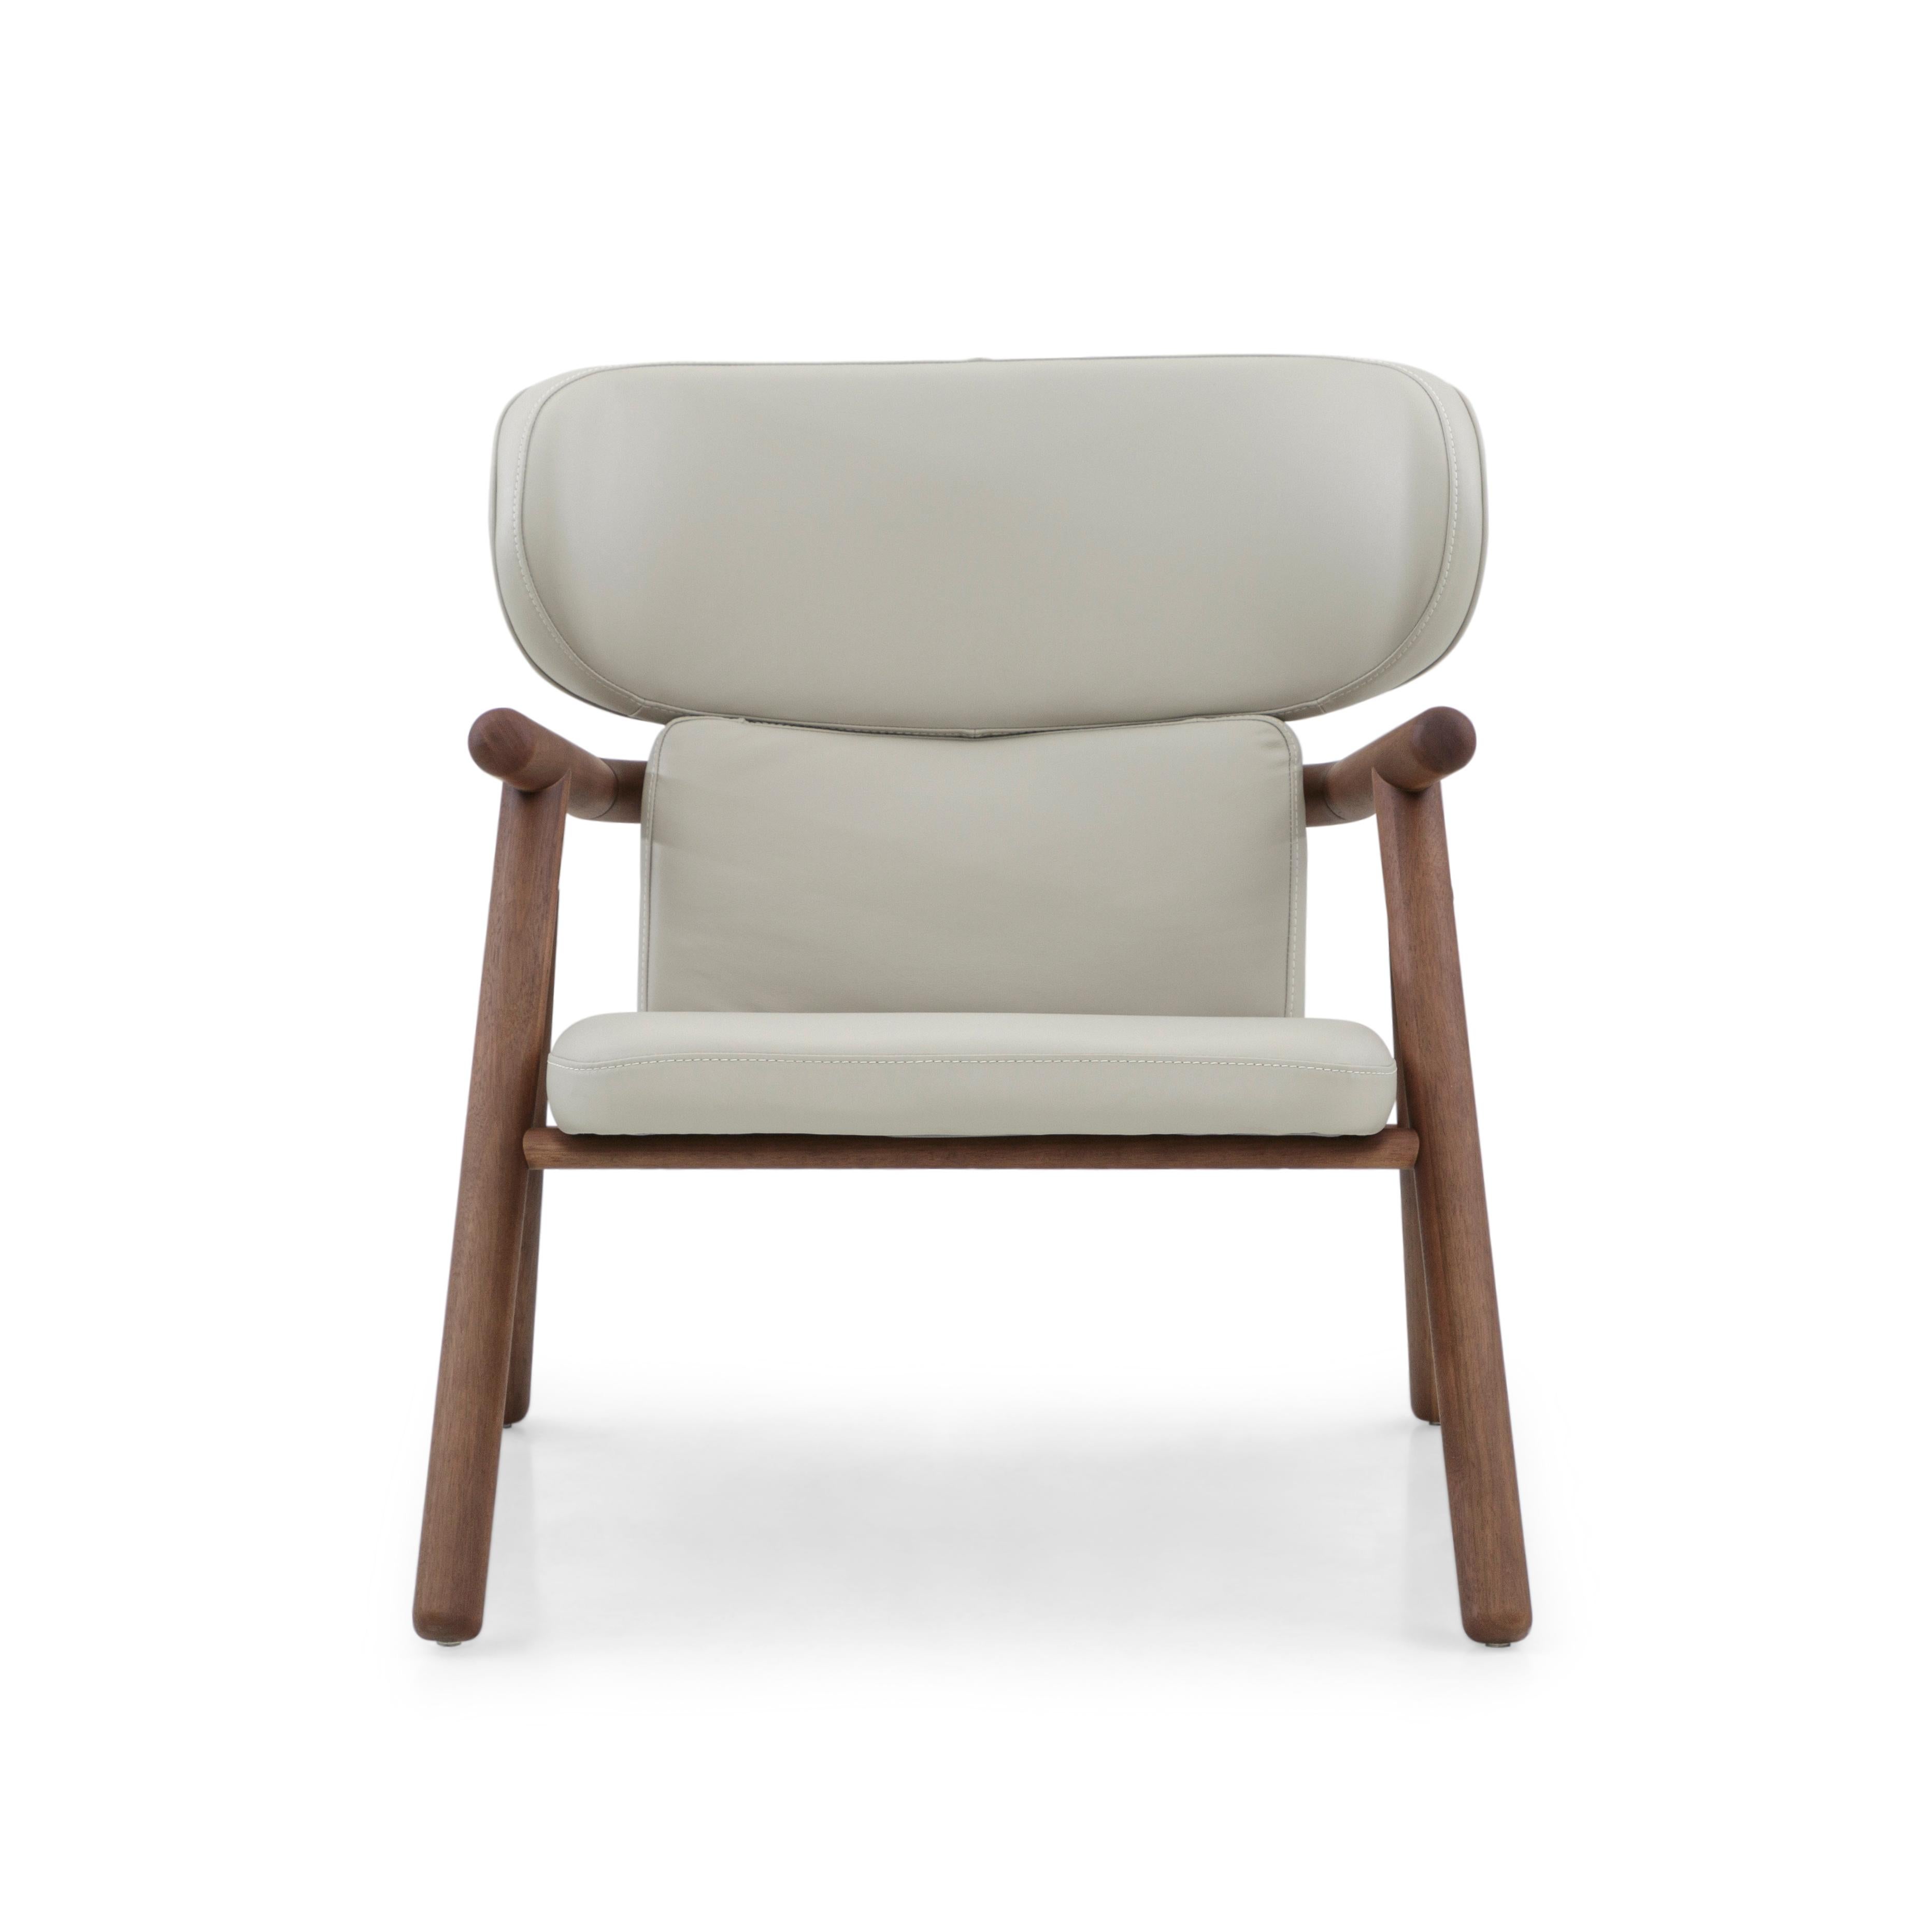 Sole Scandinavian-Styled Armchair in Walnut Wood Finish and Off-White Leather In New Condition For Sale In Miami, FL